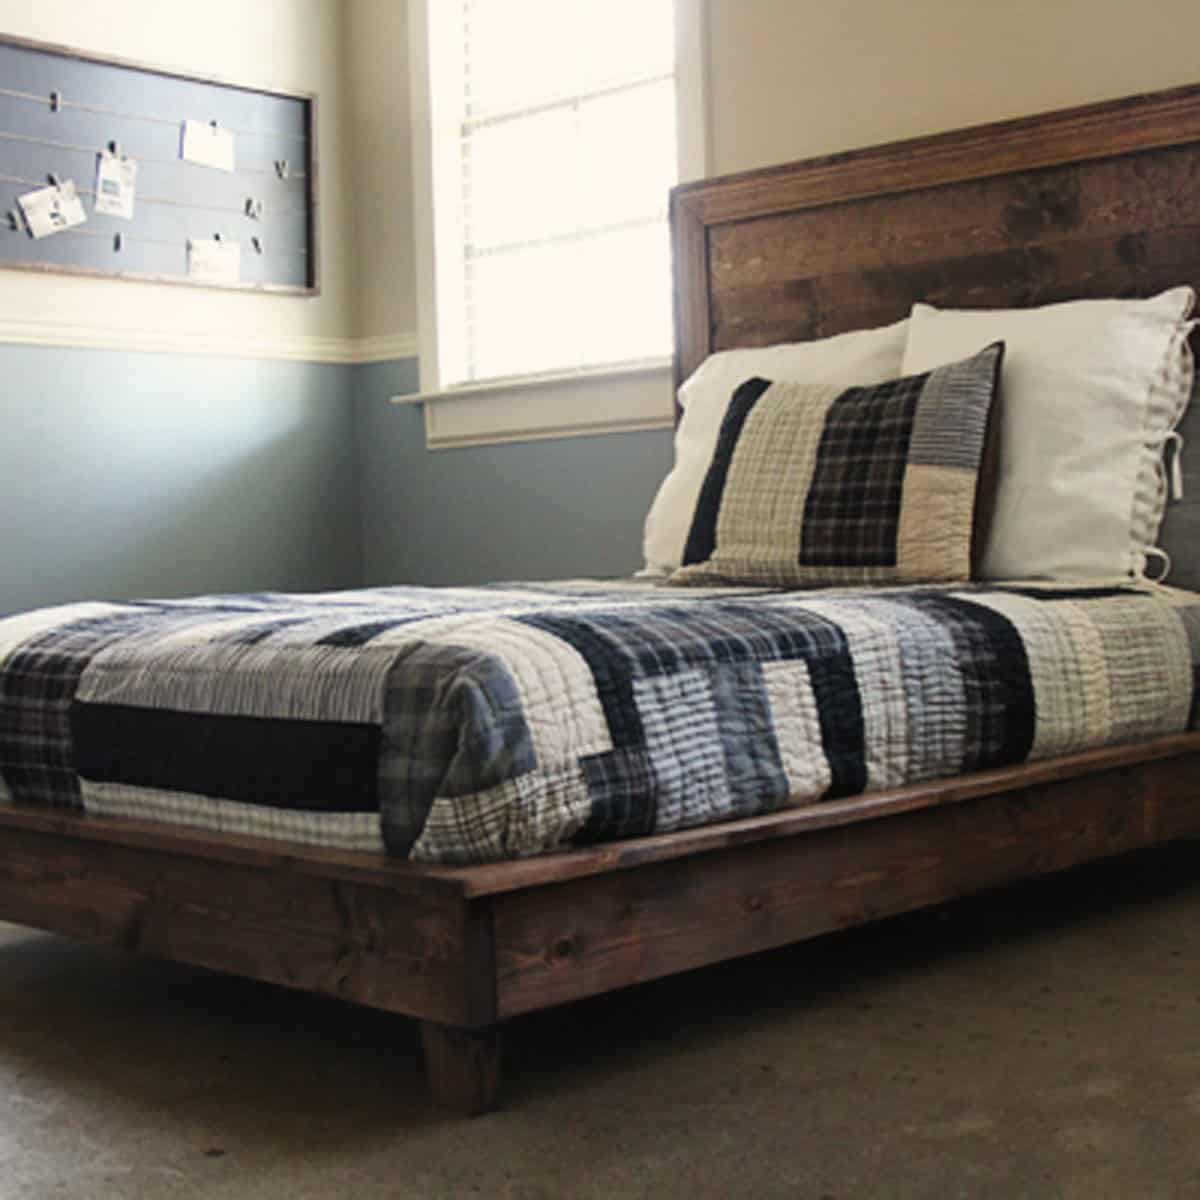 20 DIY Platform Bed Ideas Simple and Strong Constructions